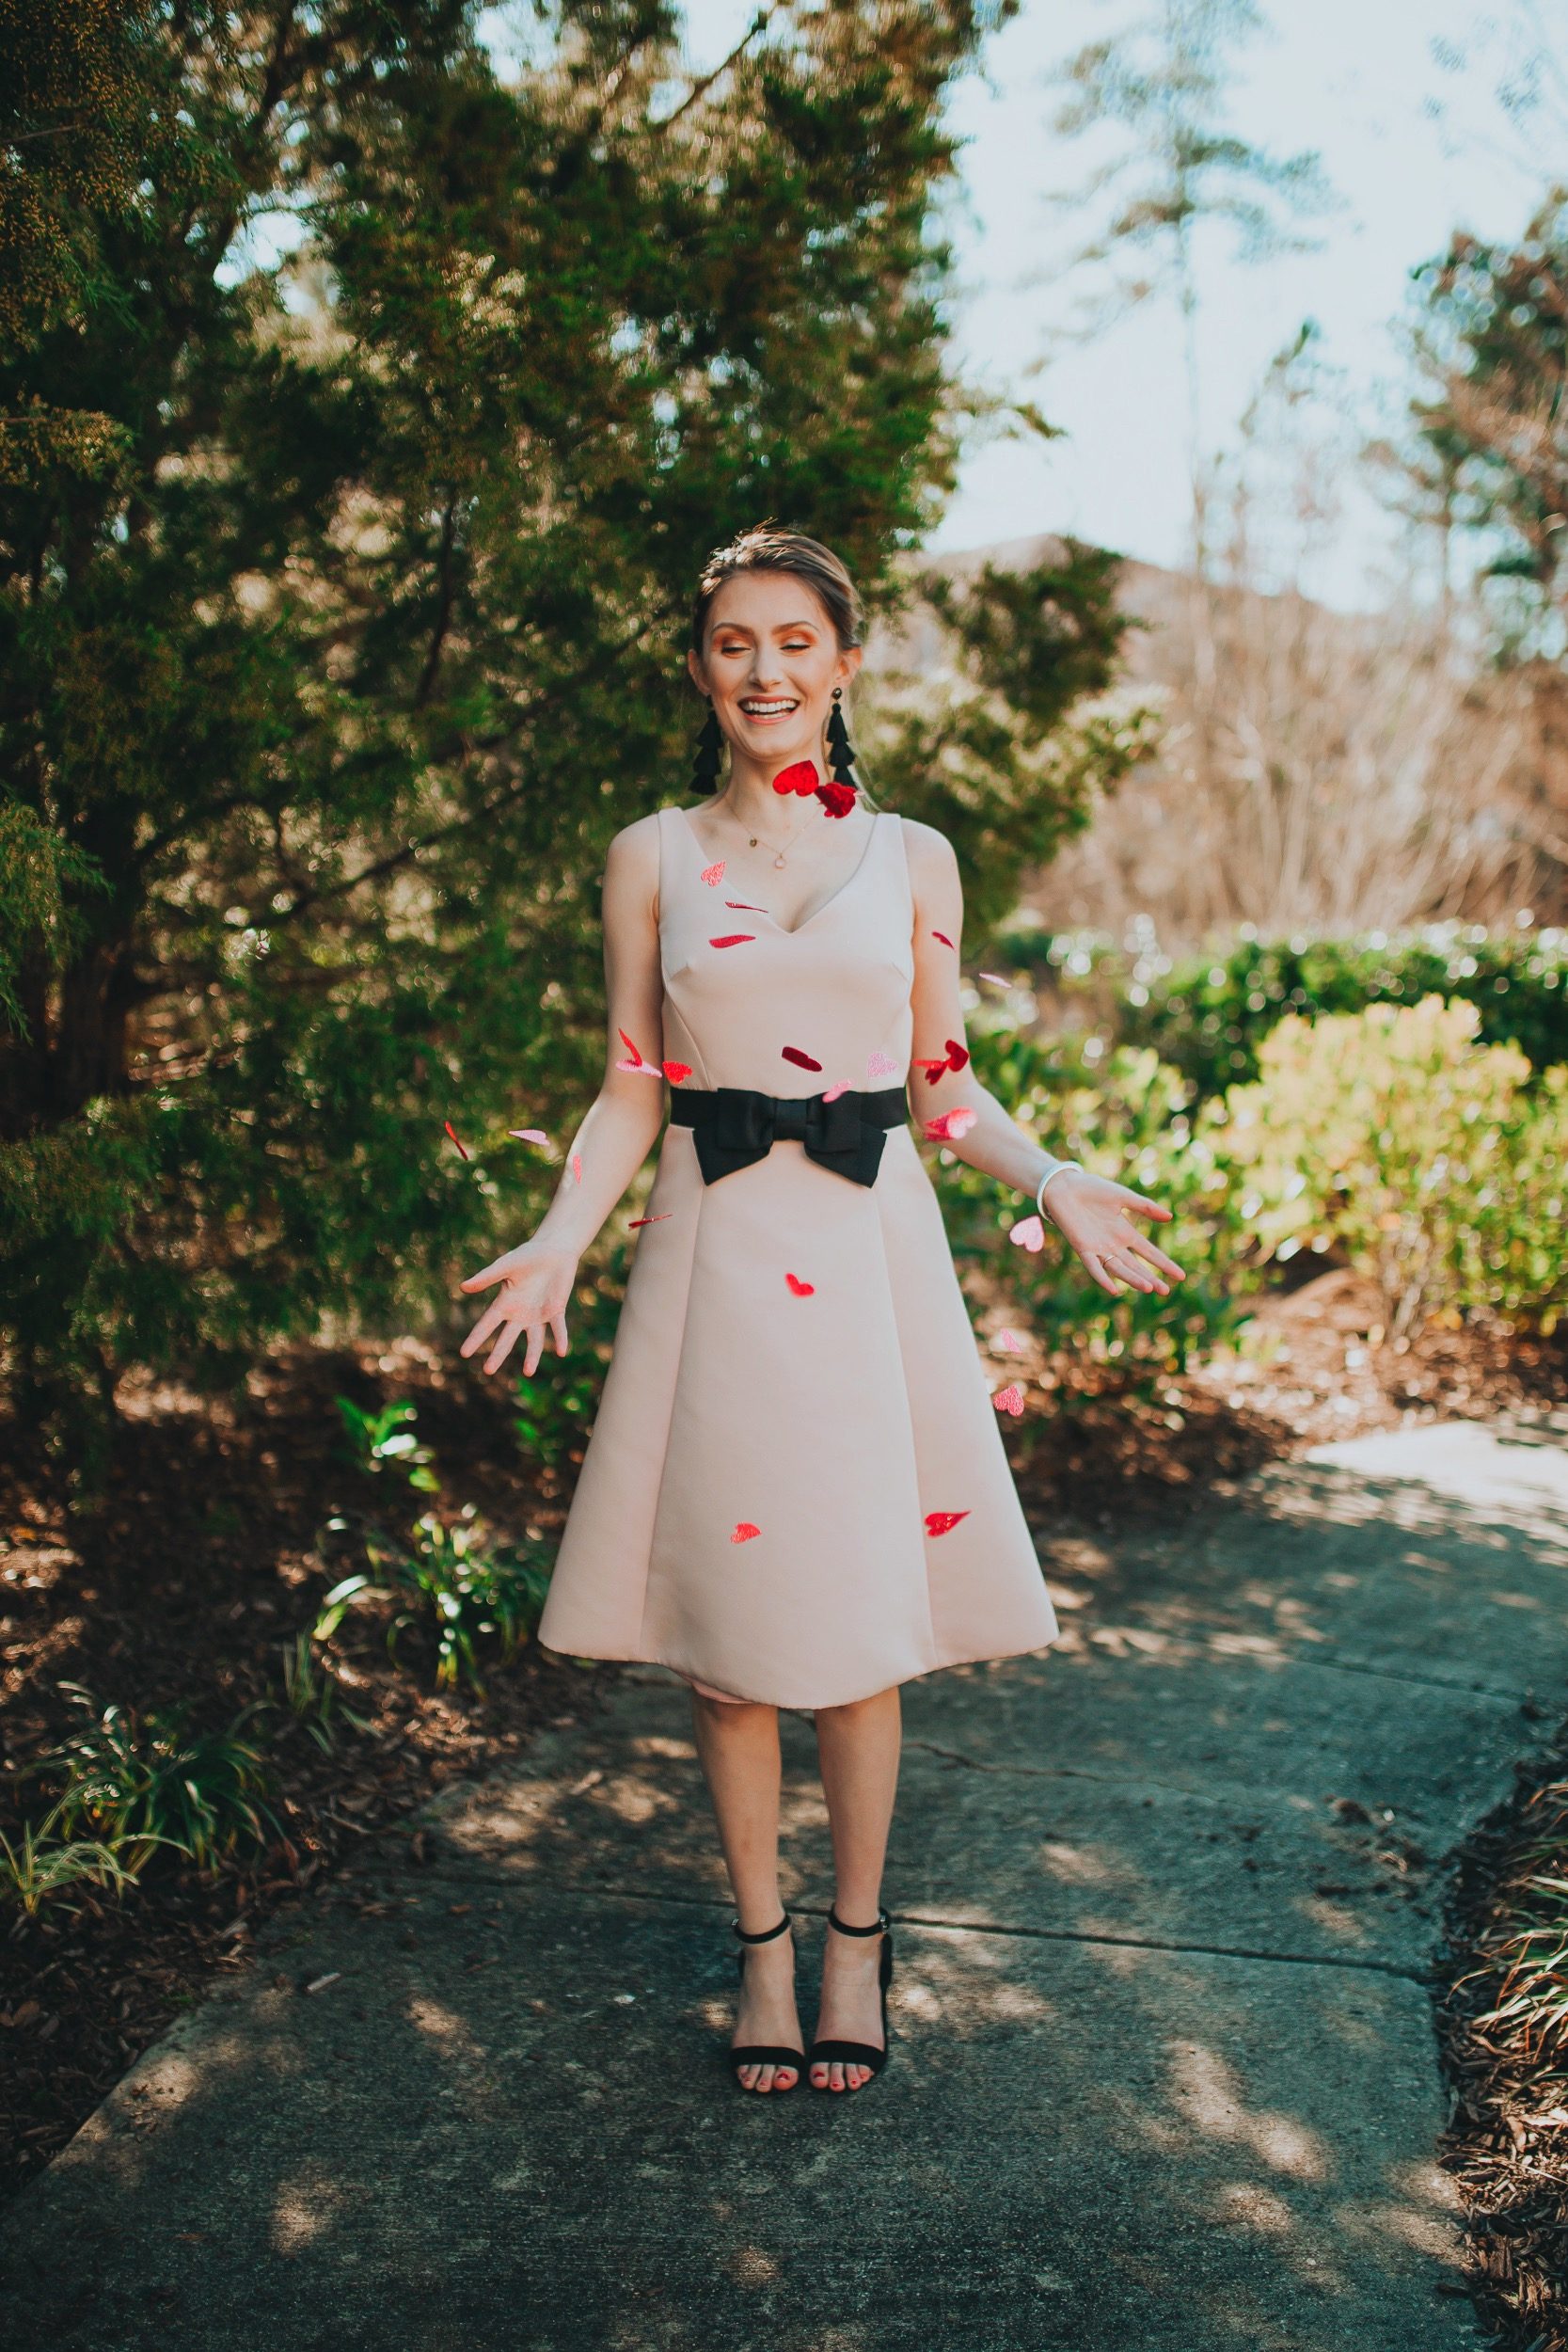 Valentines Day Outfit Inspiration | Kate Spade Fit & Flare Dress by popular North Carolina fashion and lifestyle blogger, Jessica Linn, owner and author or Linn Style and Babies, Love, & Lattes. Jessica wearing a pale pink fit and flare dress with a black bow on the waist, black sandal heels, and throwing glitter heart confetti.